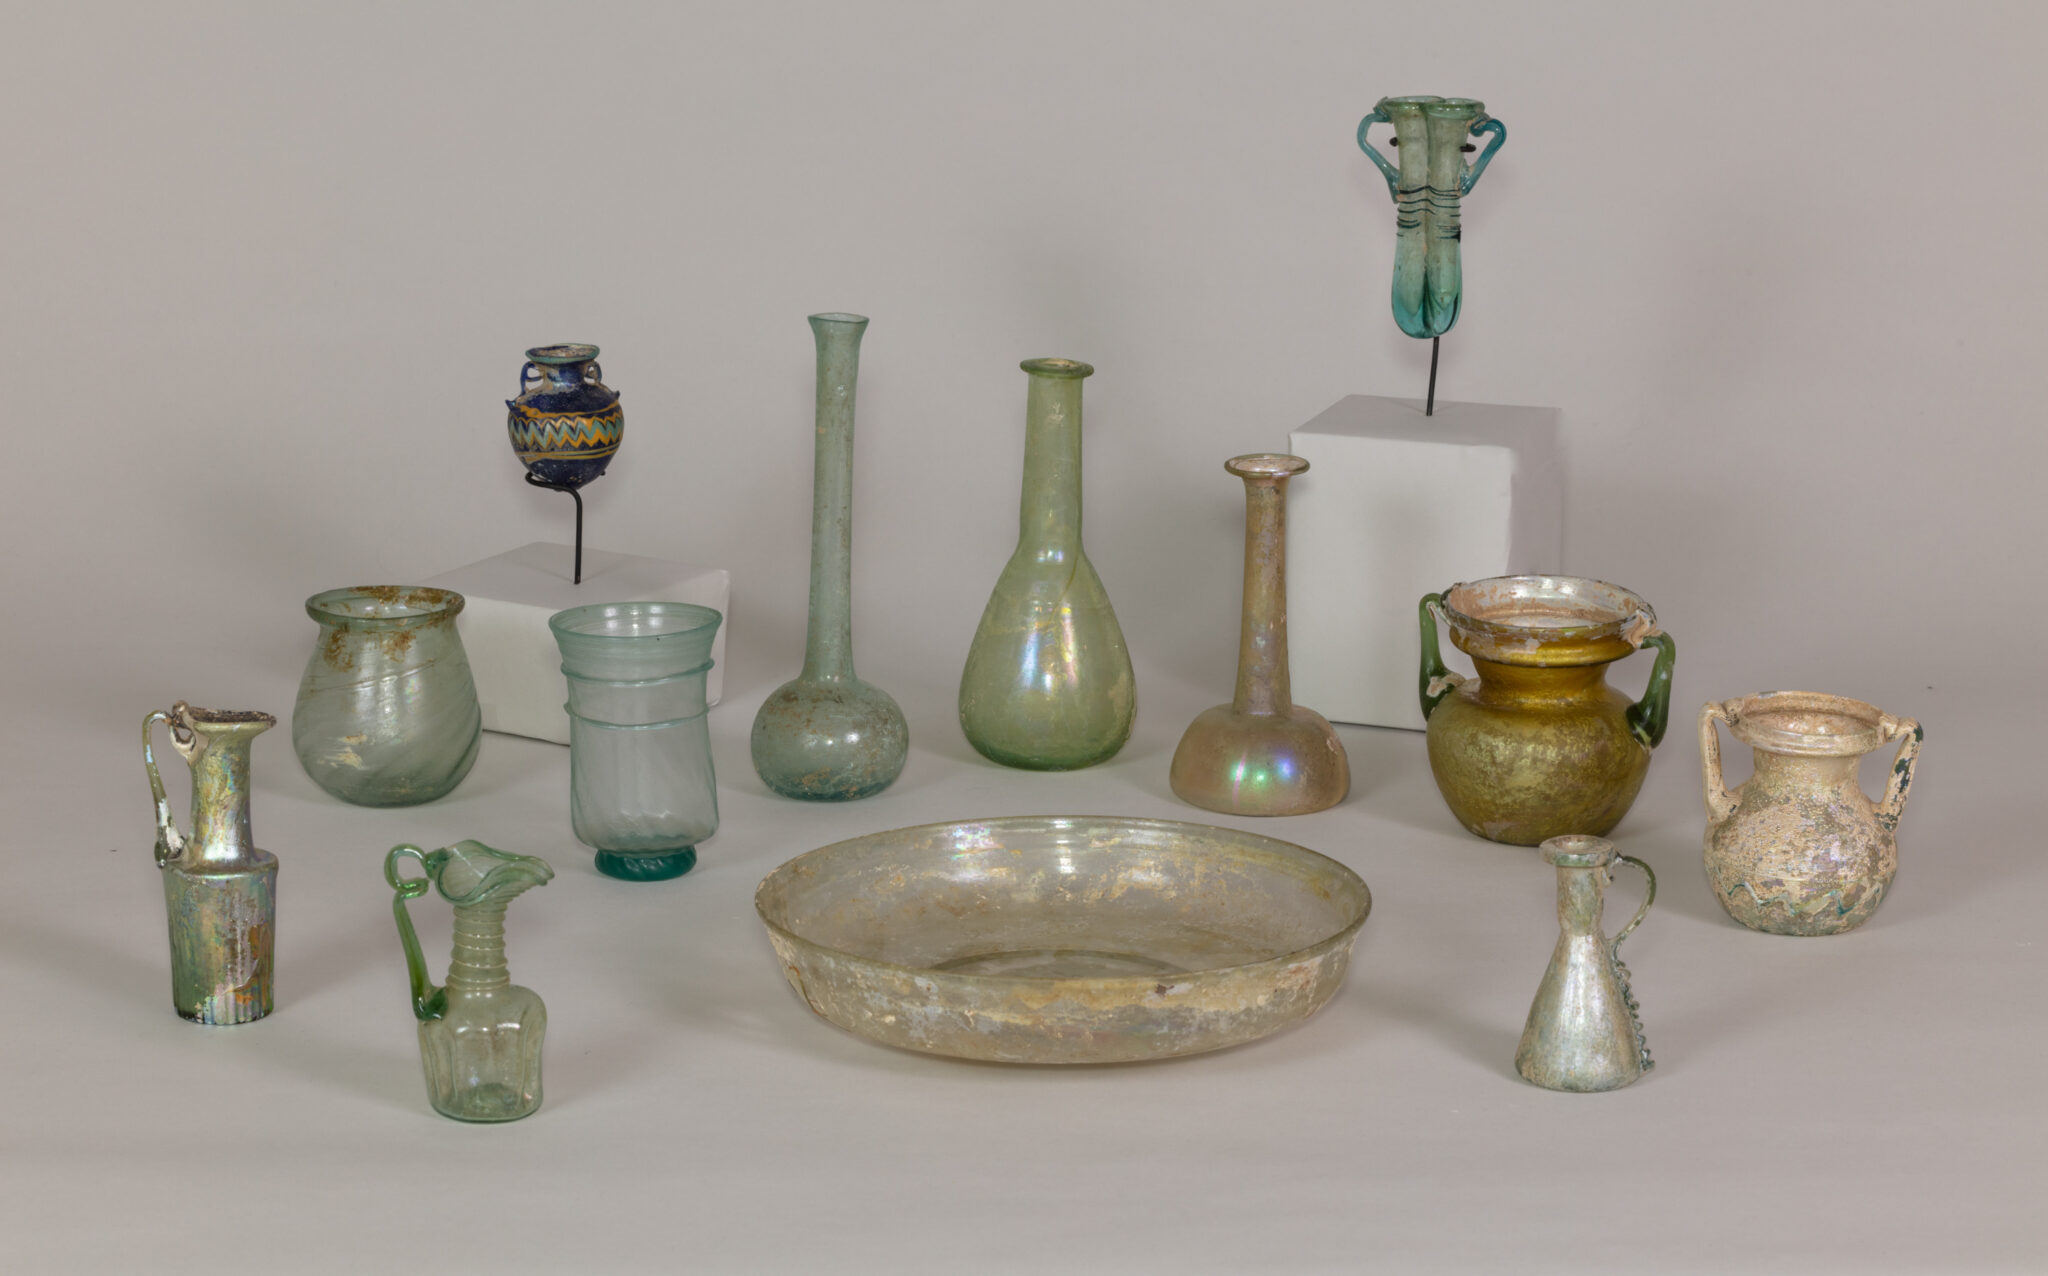 Assorted ancient glass vessels set out for display.